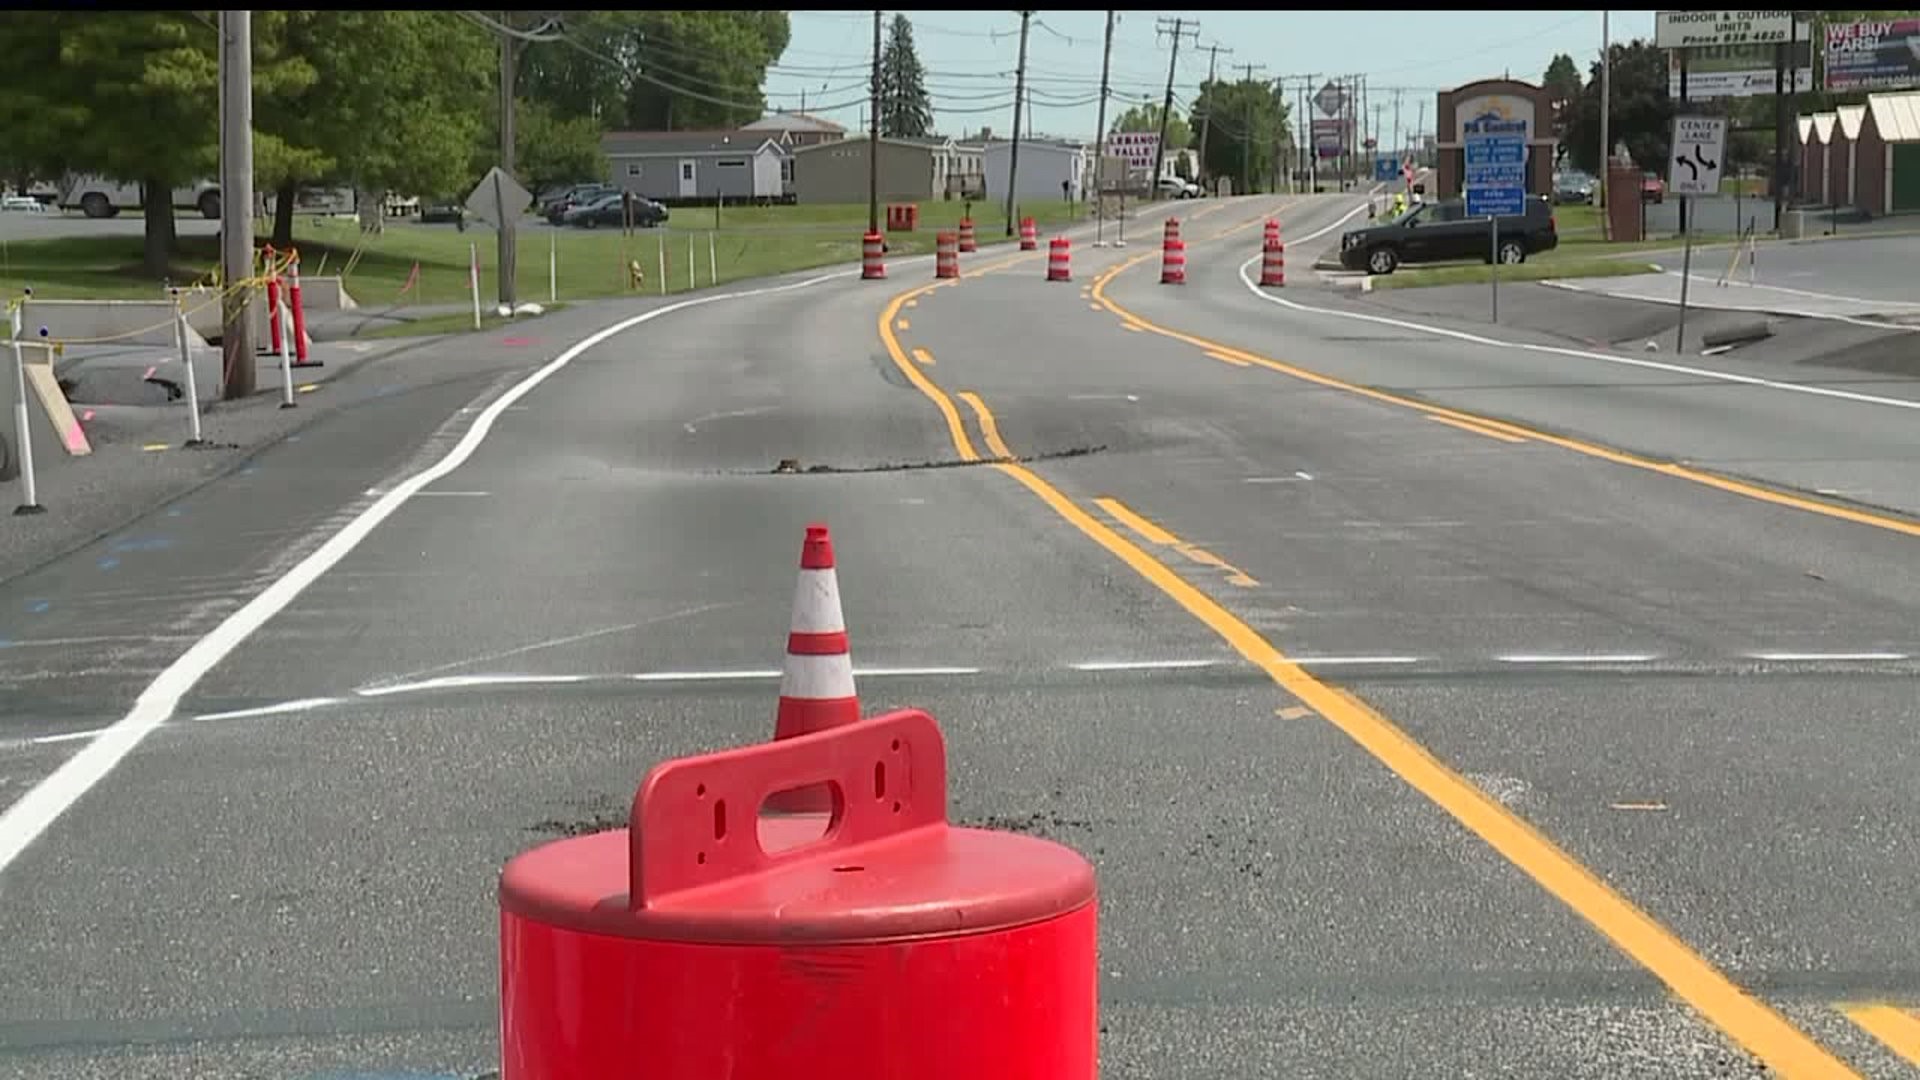 Sinkhole in Lebanon County causing traffic issues